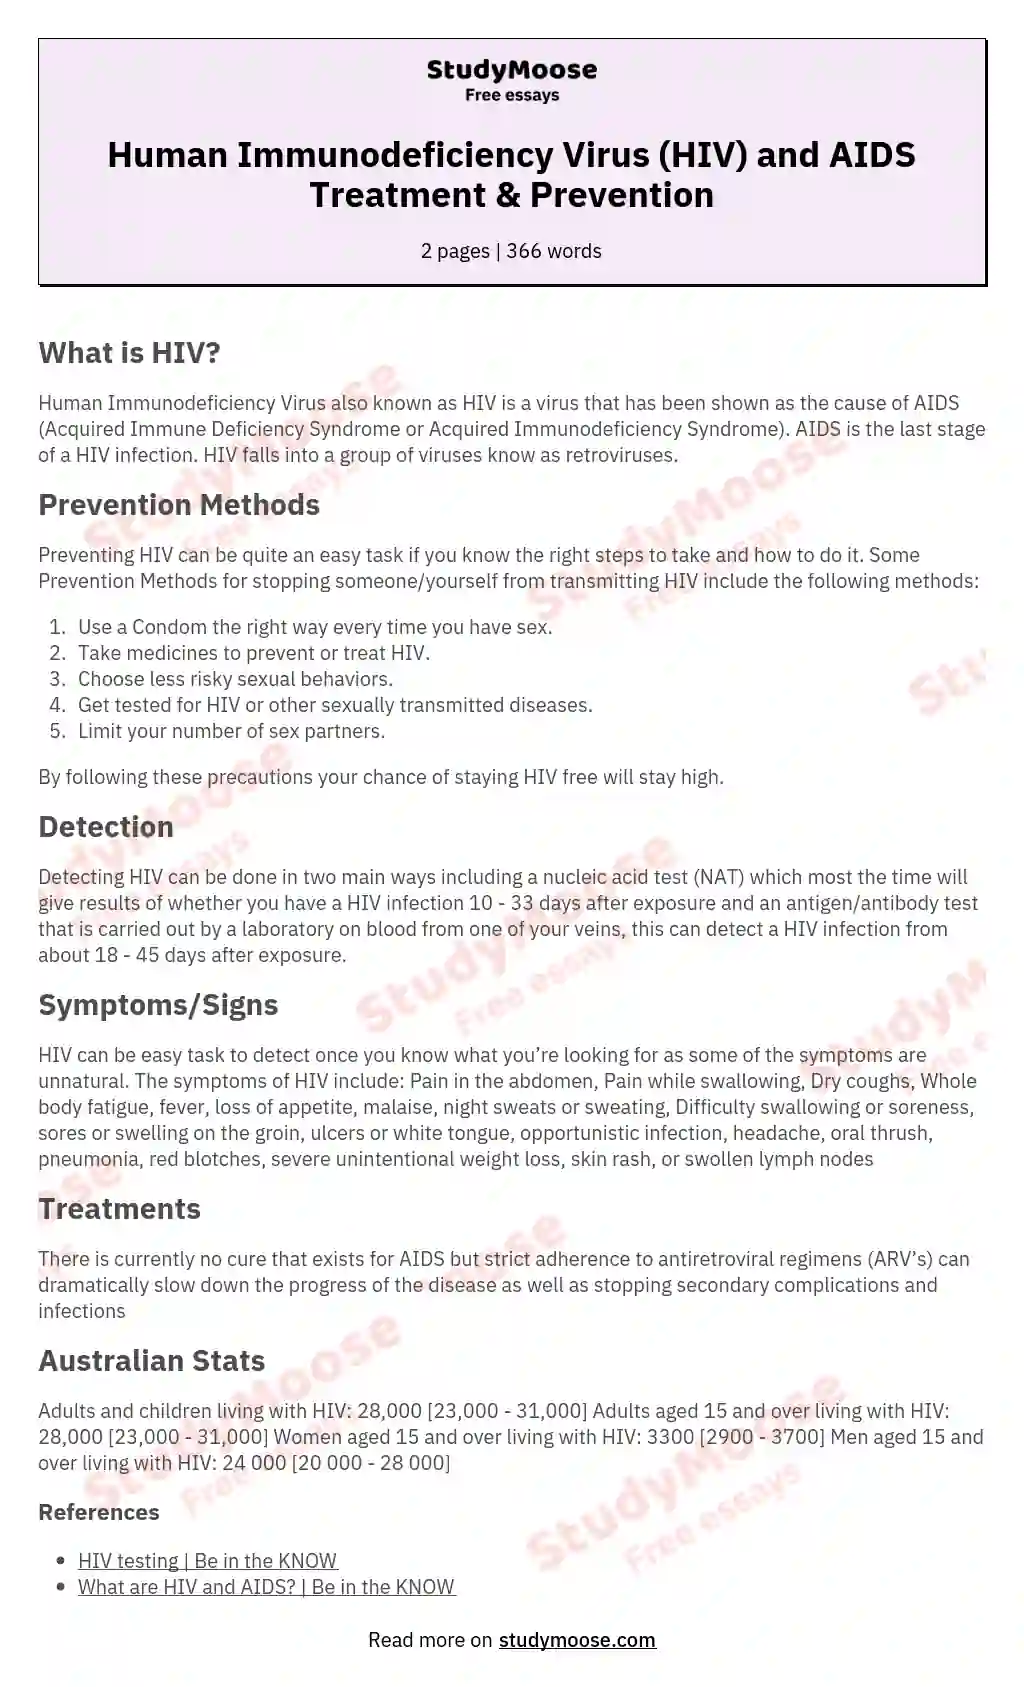 Human Immunodeficiency Virus (HIV) and AIDS Treatment & Prevention essay